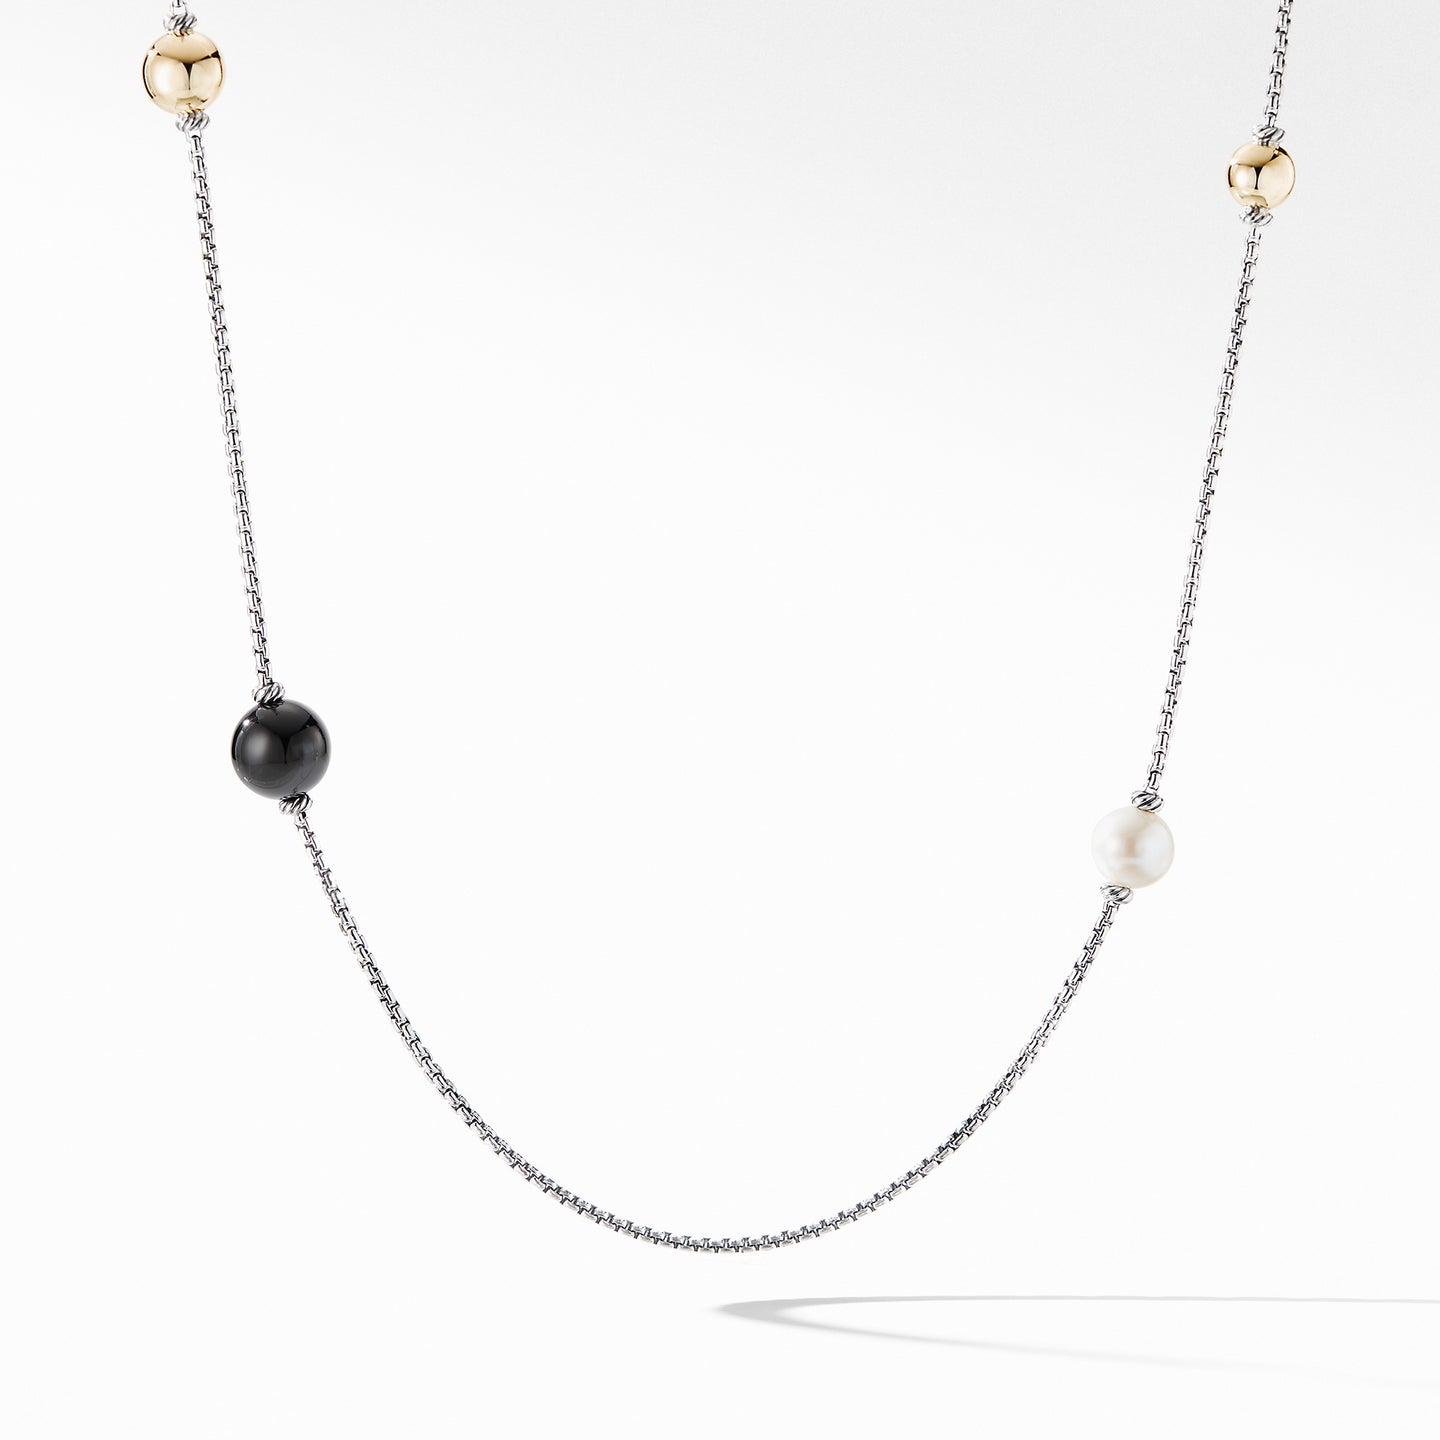 Solari XL Station Chain Necklace with Black Onyx, Pearls and 14K Yellow Gold, 36